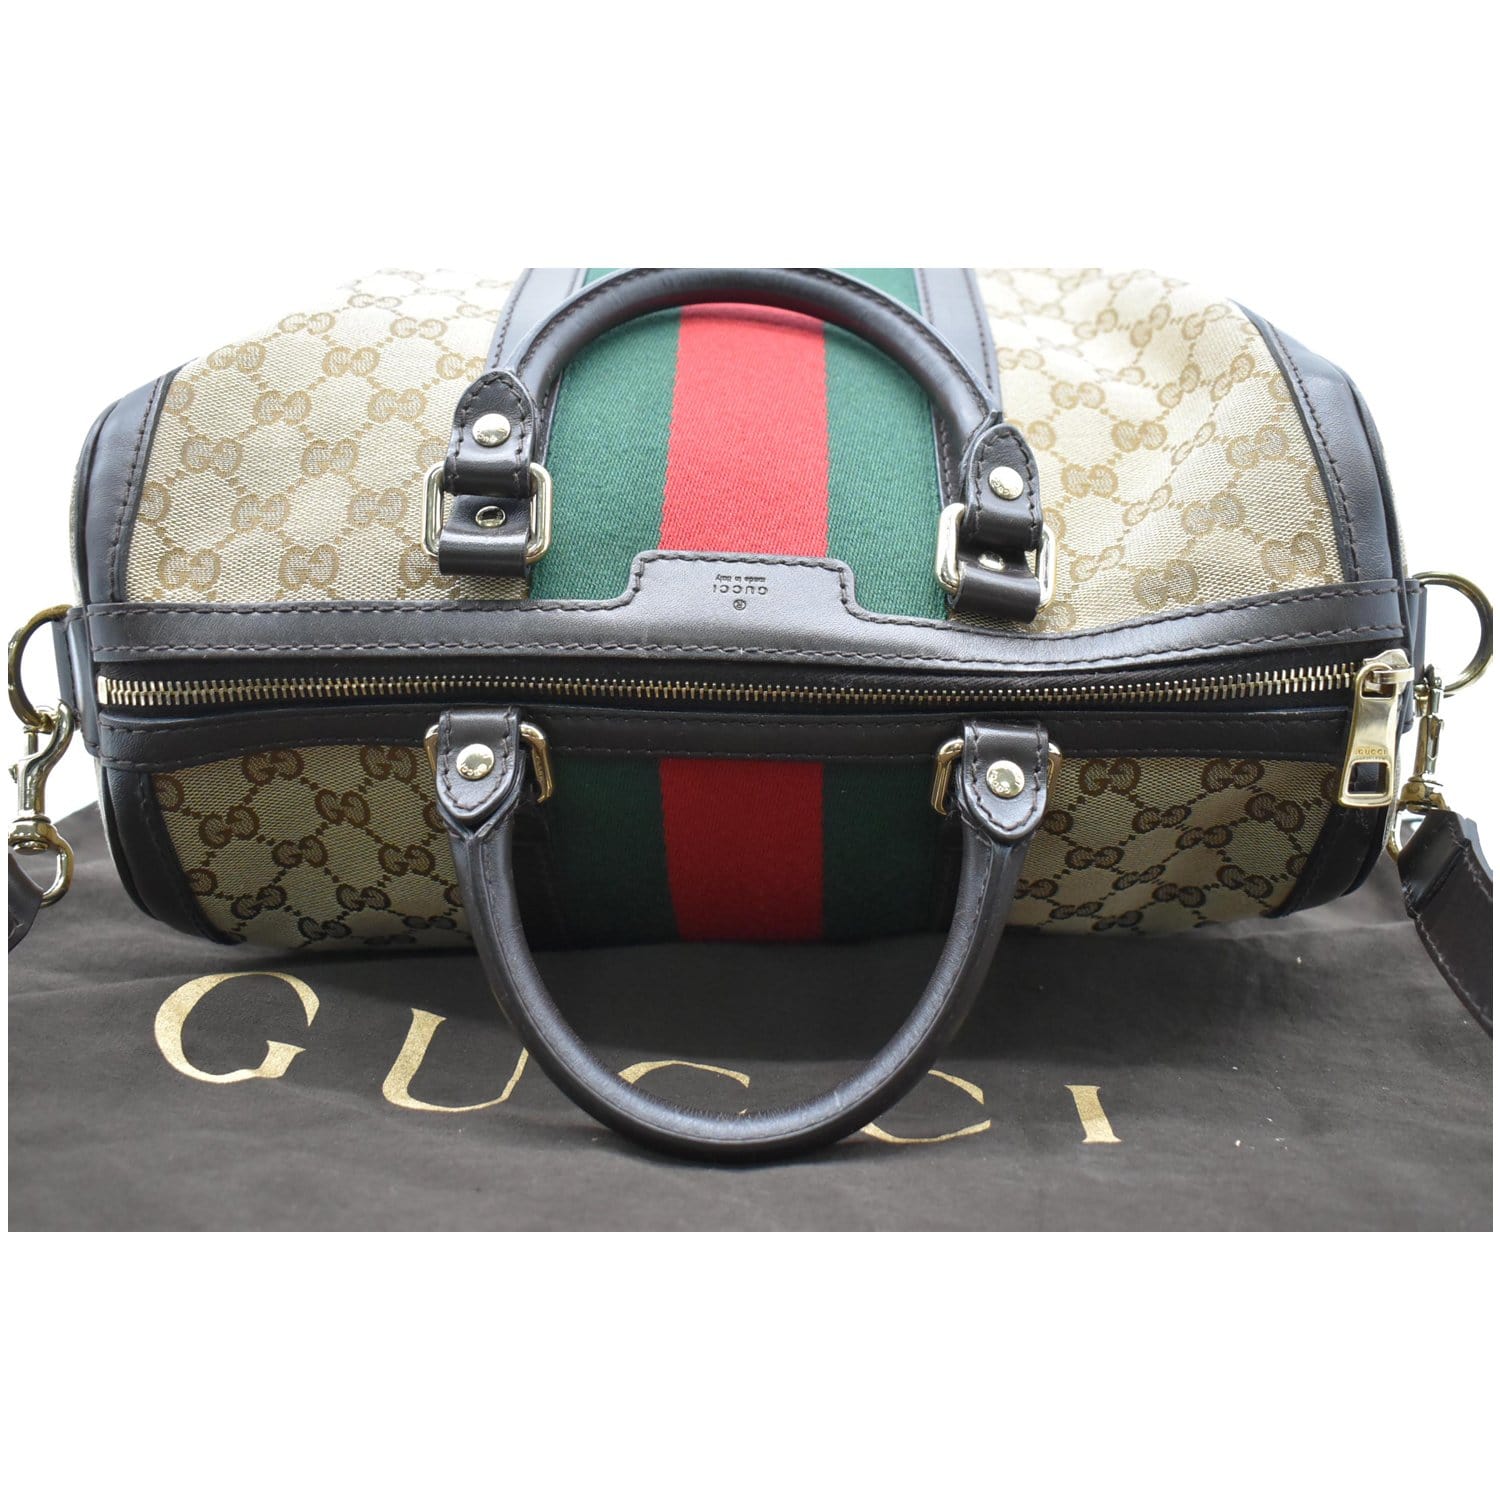 Gucci, Bags, Soldvintage Authentic Gucci Speedy Bag